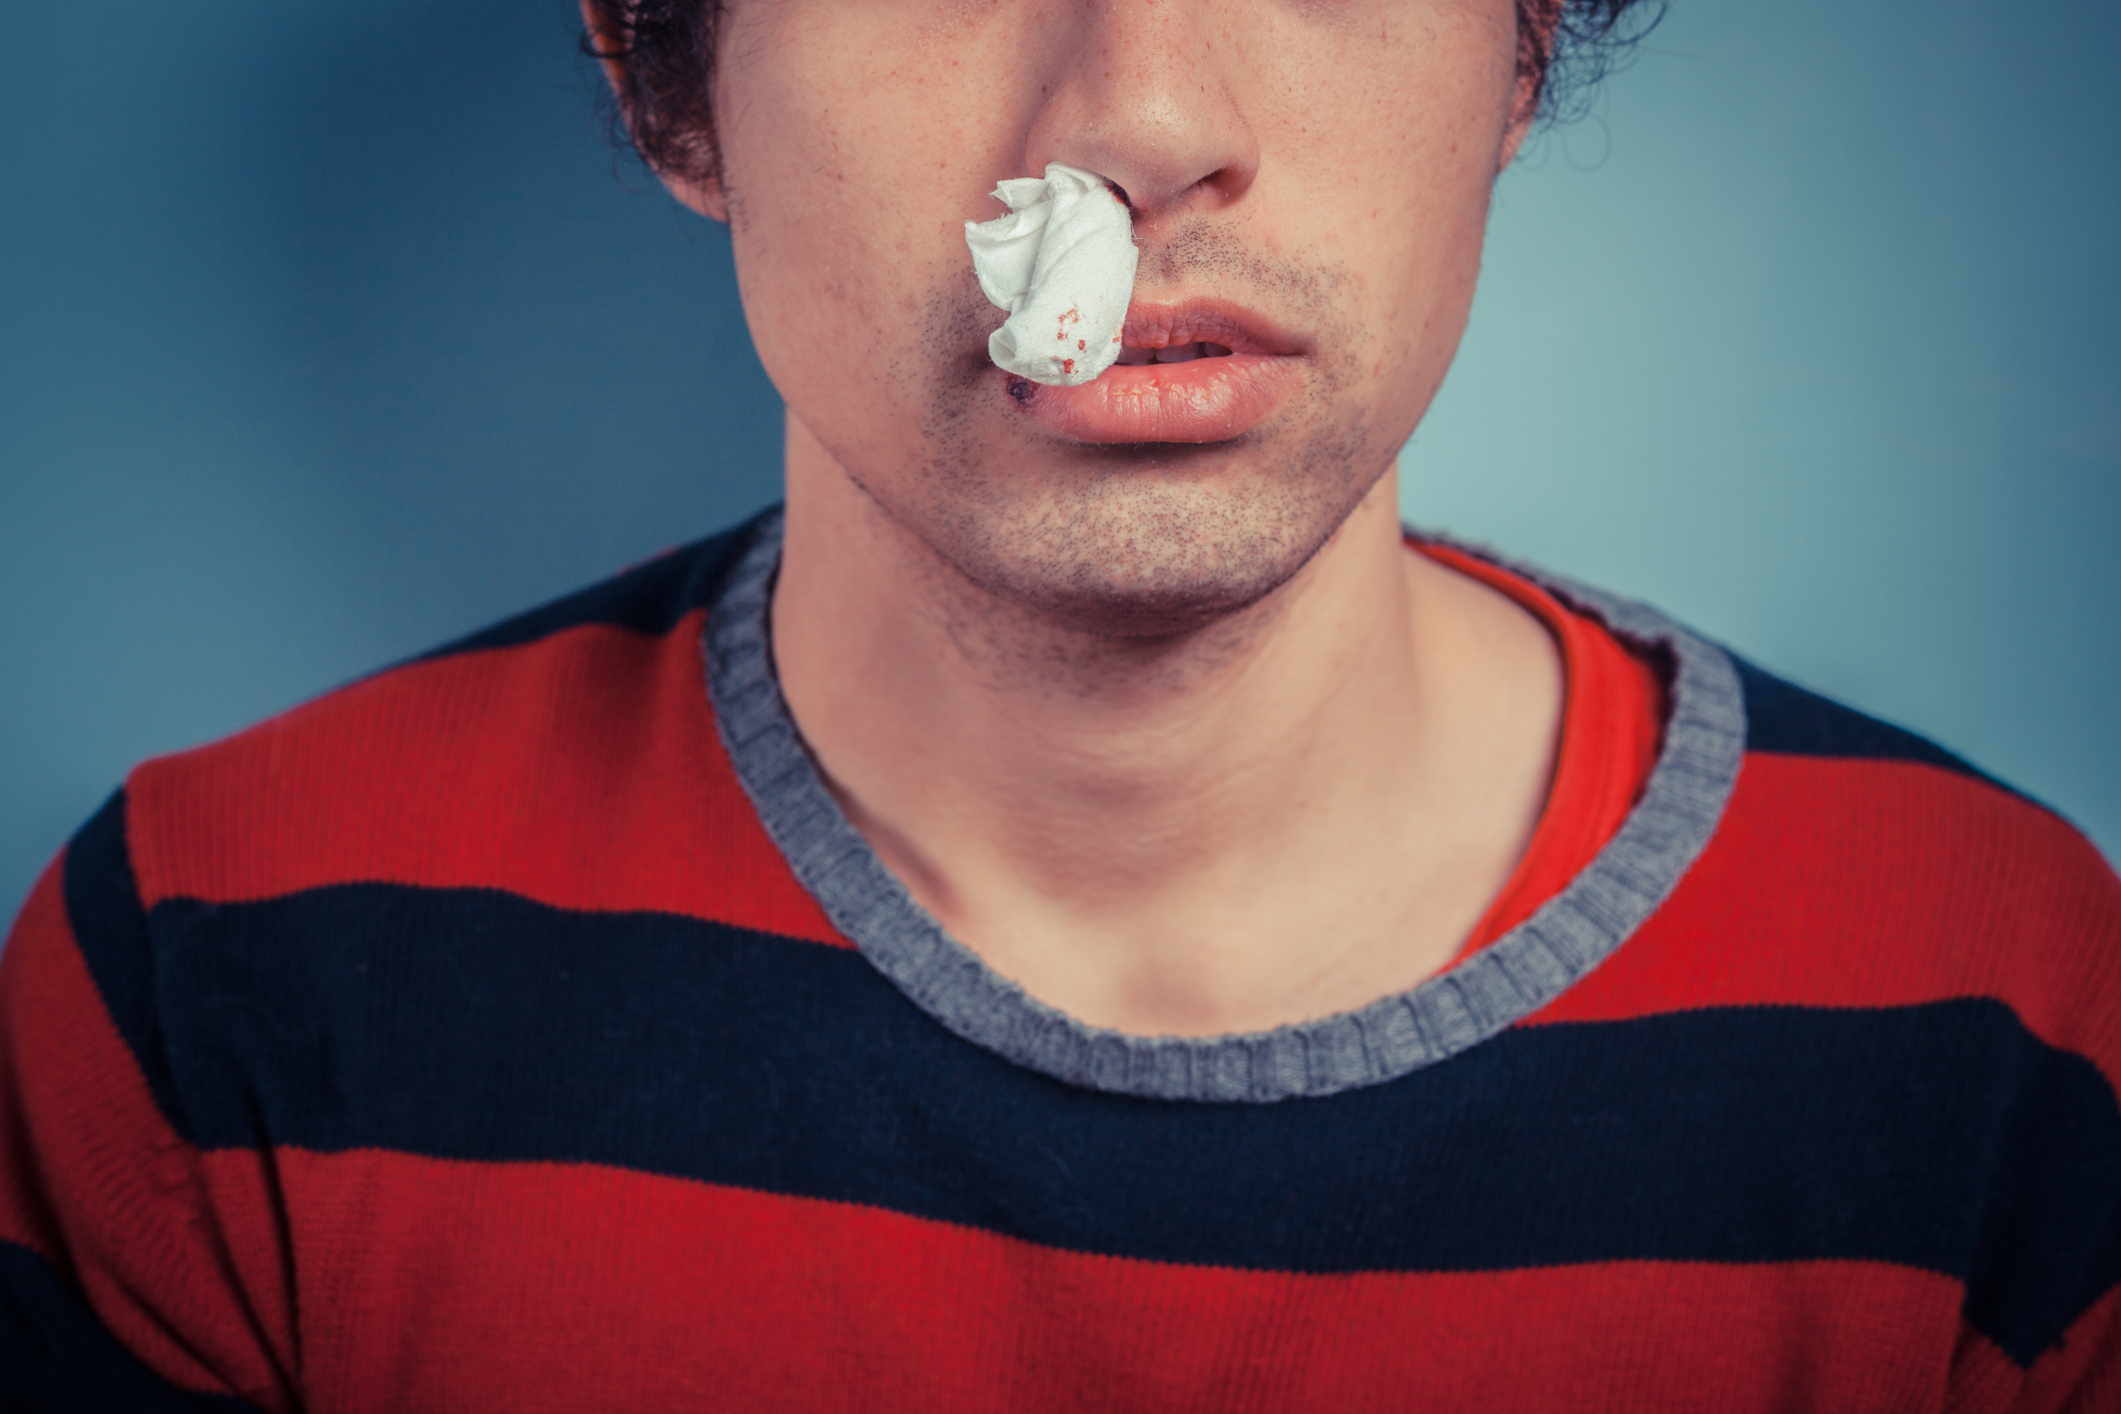 Person with tissue in their nose, indicating a nosebleed or nasal issue, wearing a striped shirt